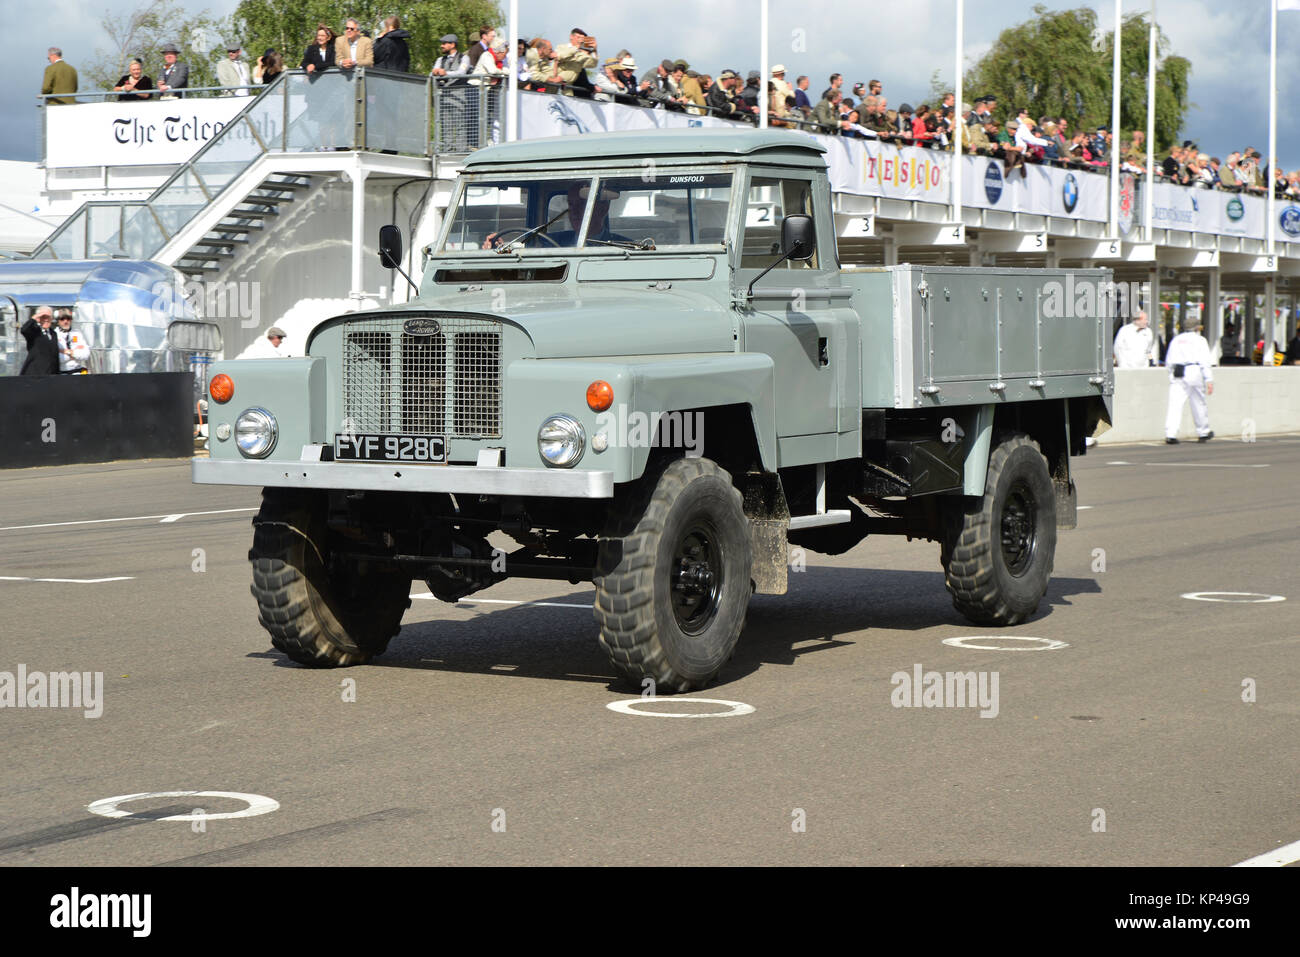 Prototype 35cwt Turbo Diesel Truck, FYF 928 C, Land Rover Parade, Goodwood Revival 2015, 4x4, Defender, Dunsfold collection, four by four, Goodwood, G Stock Photo